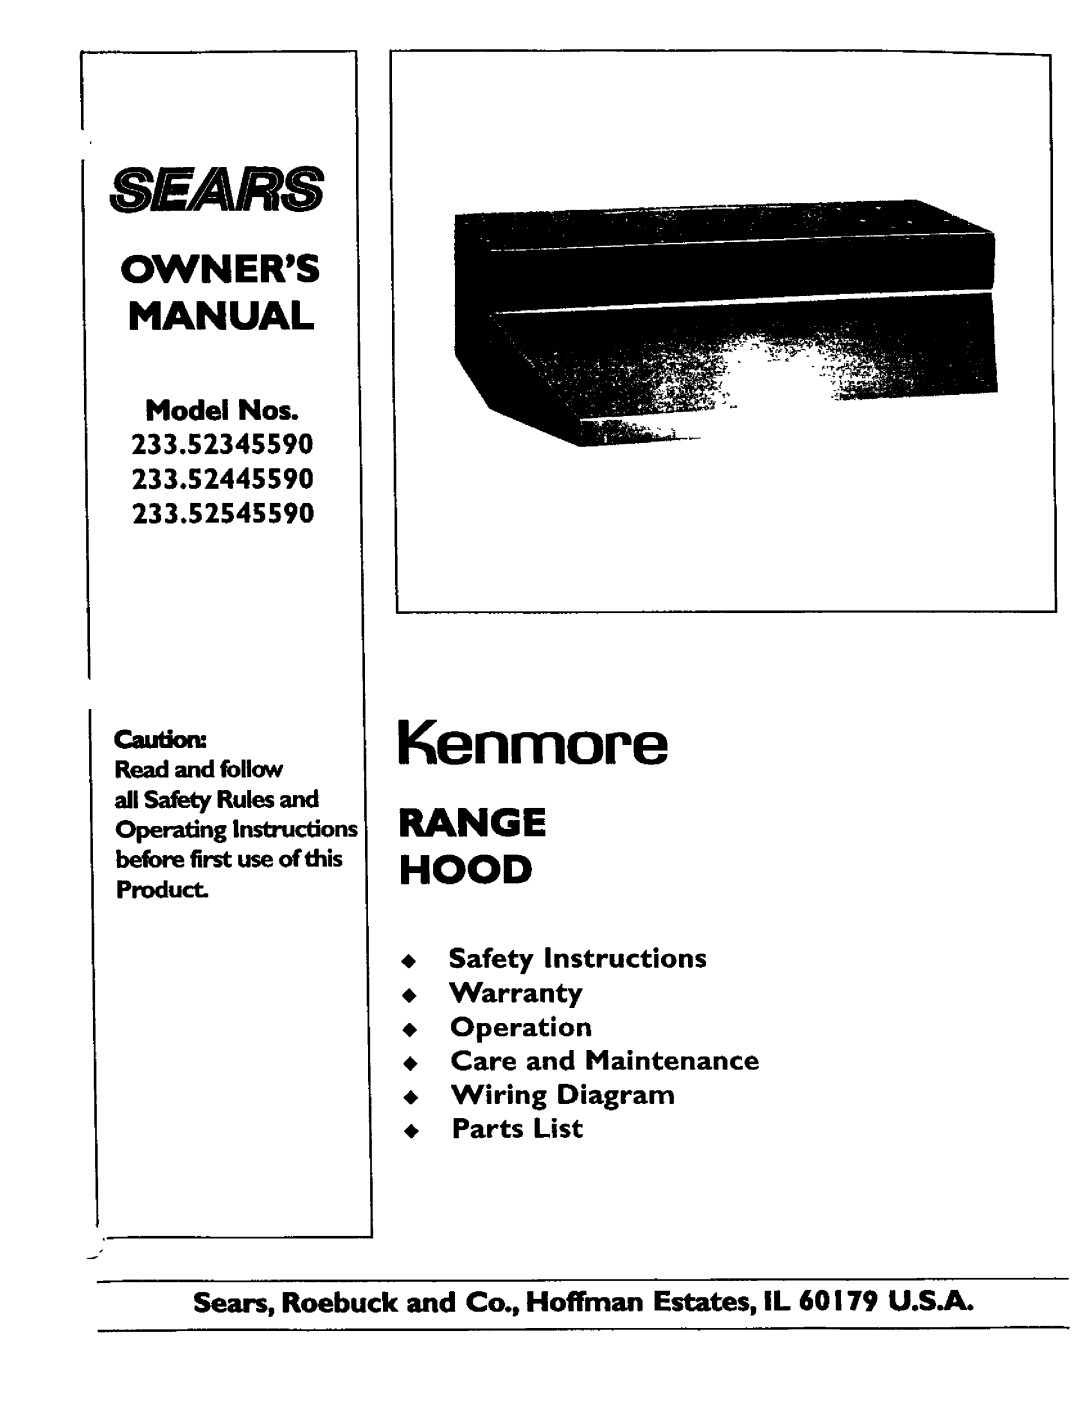 Kenmore 233.52345590 owner manual Read and follow all Safety Rules and, Operating Ins ctlons before first use of this 